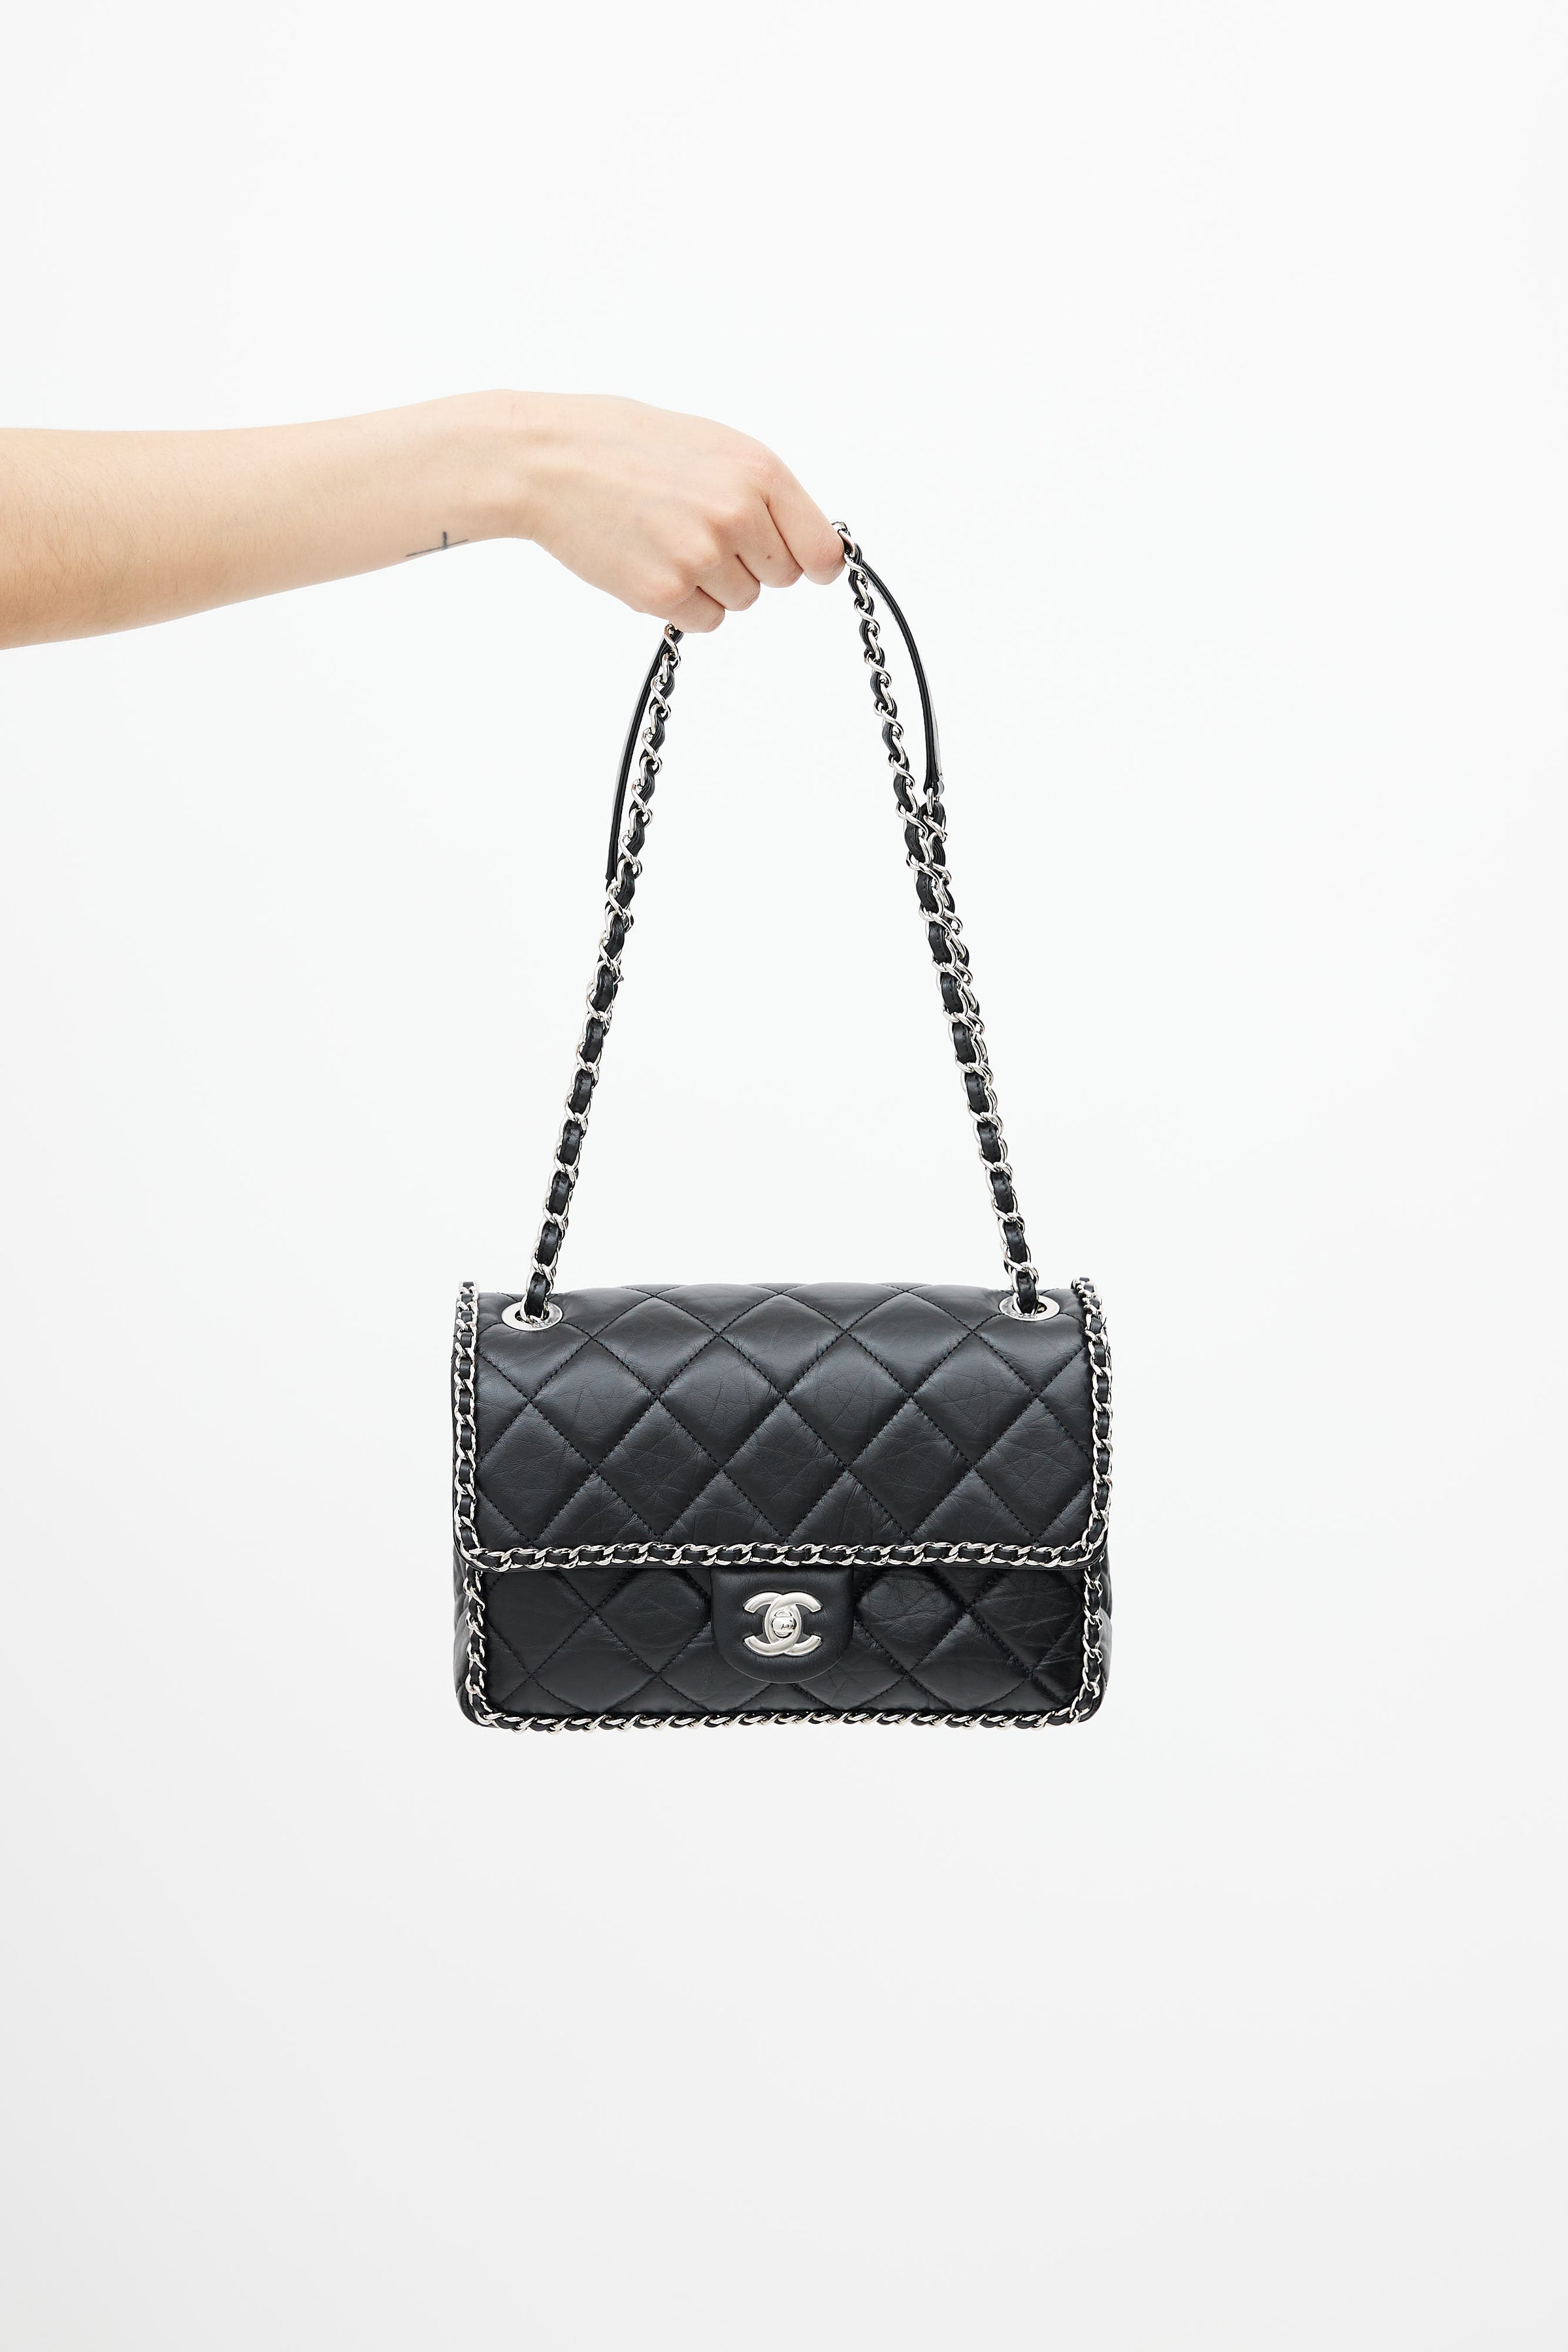 chanel ombre crystal bag